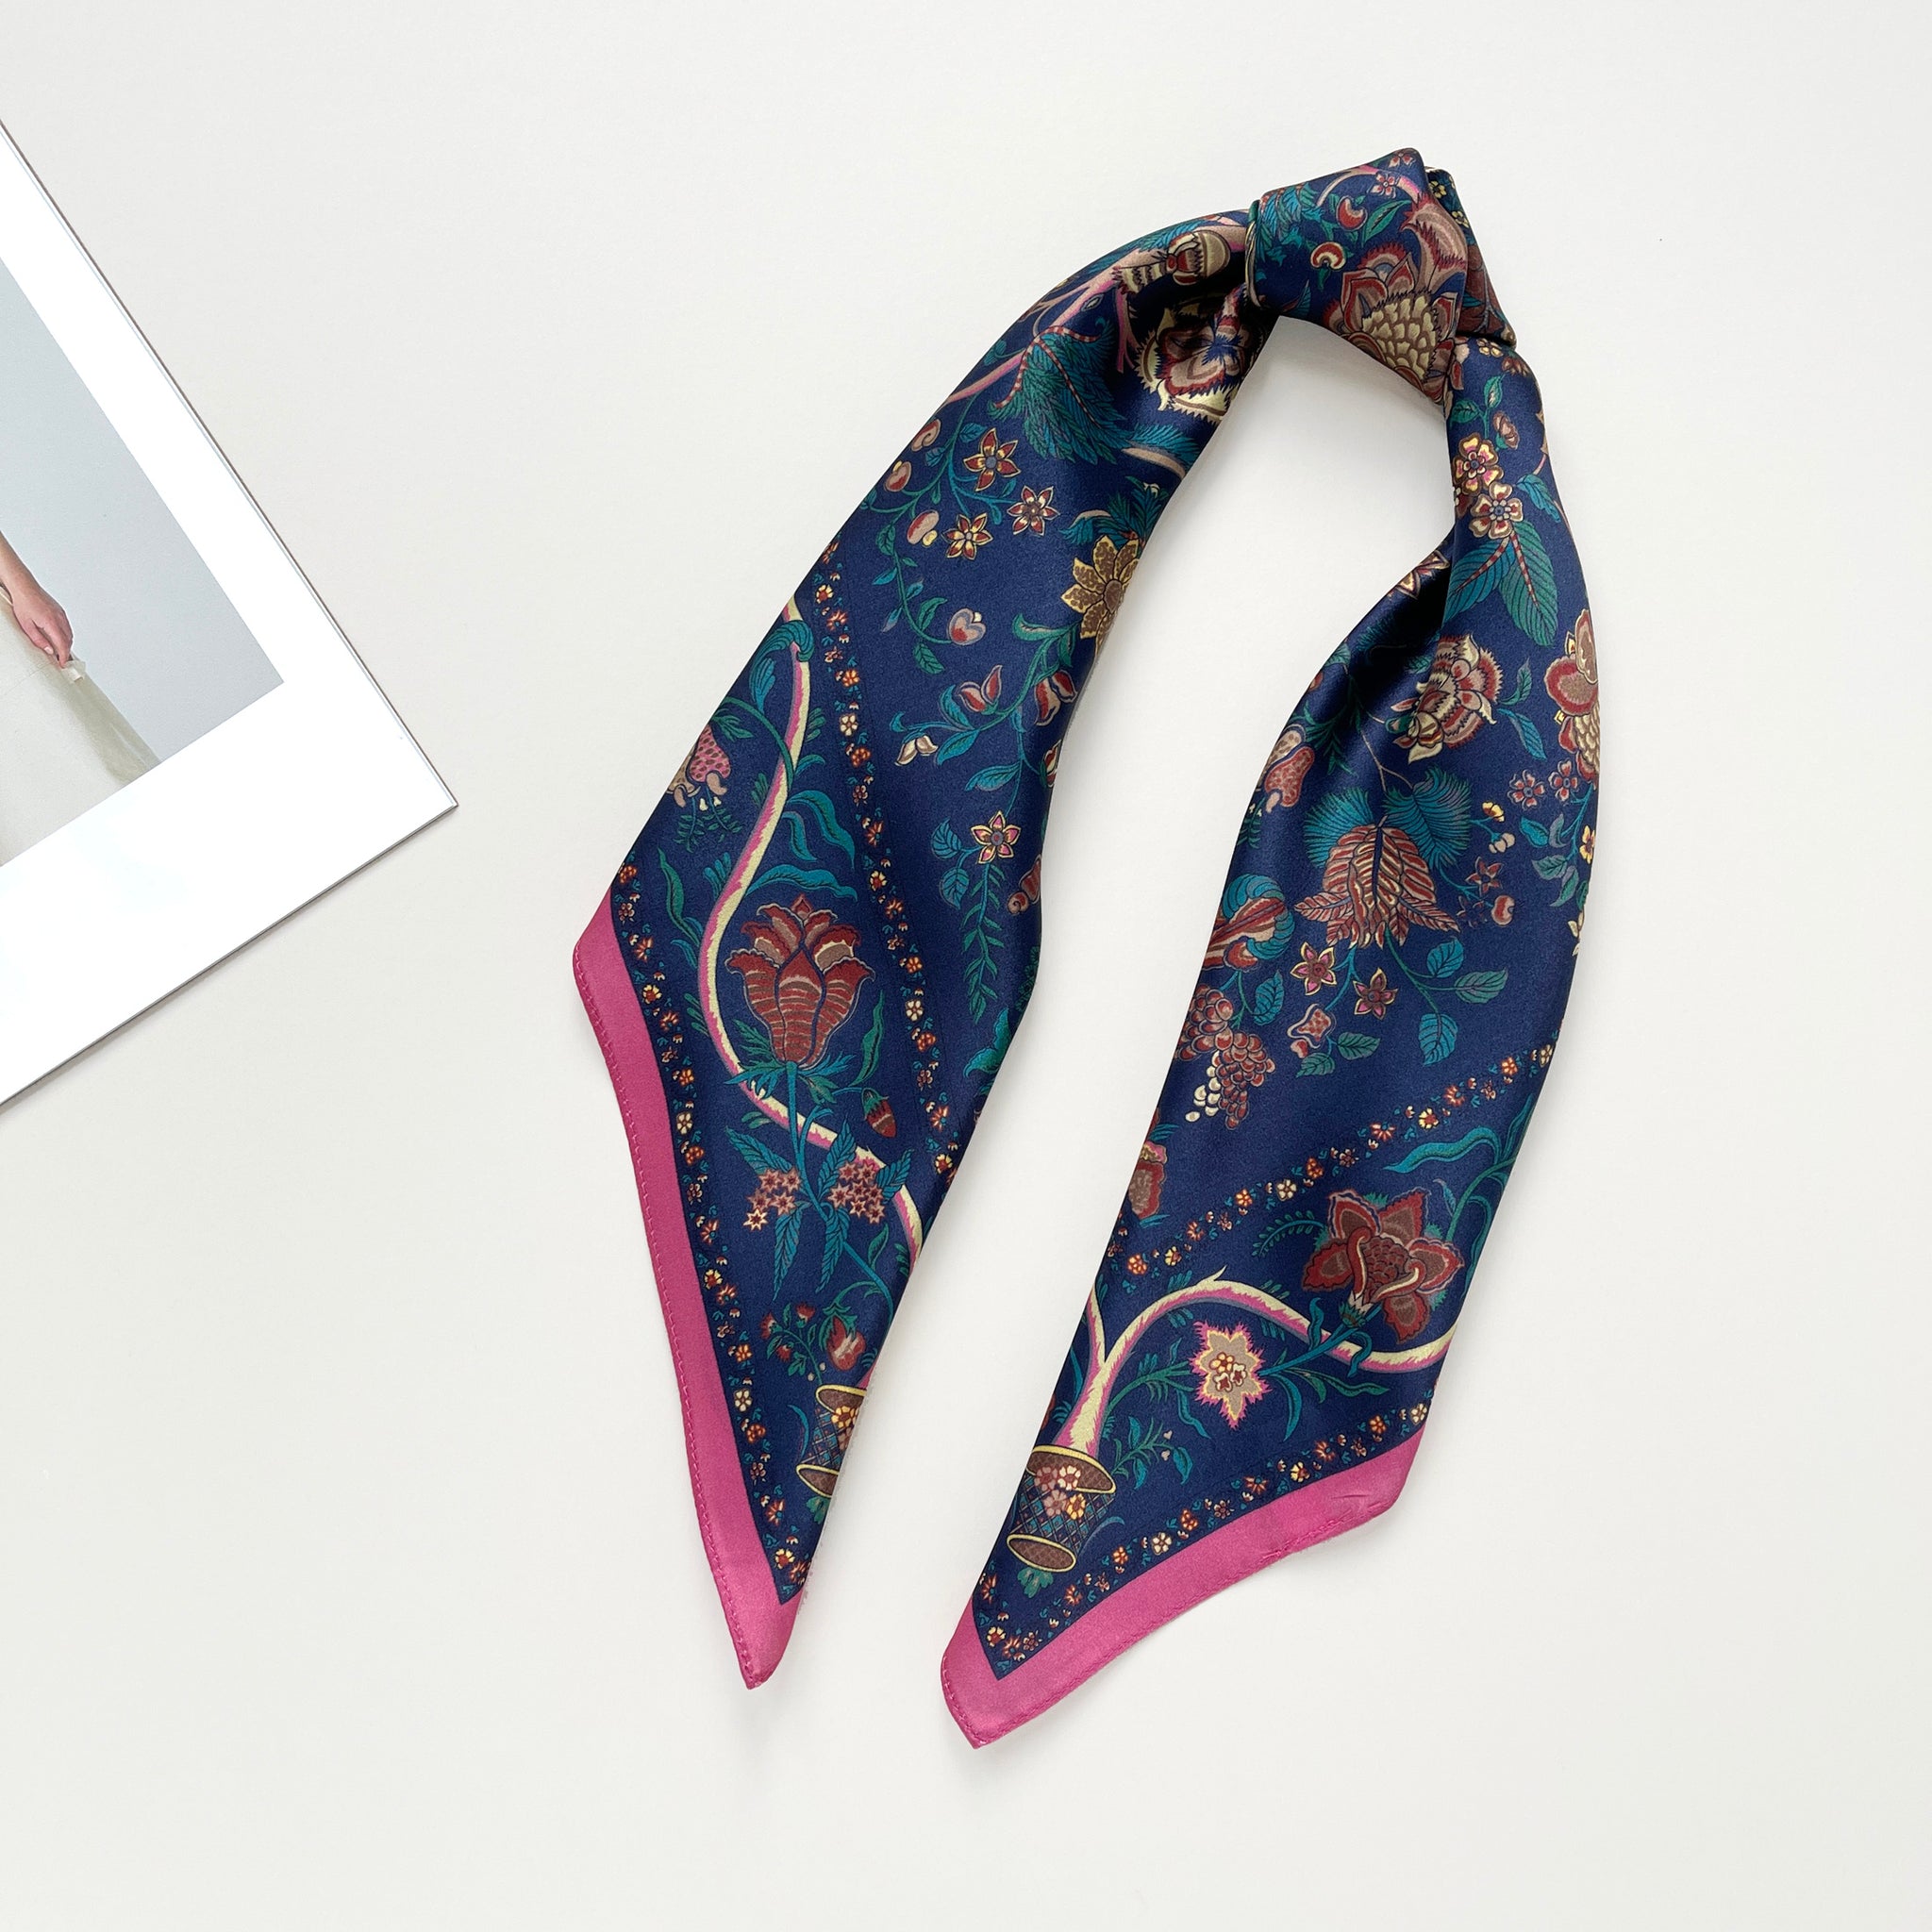 a blue vintage inspired floral silk scarf with magenta edge knotted as ponytail